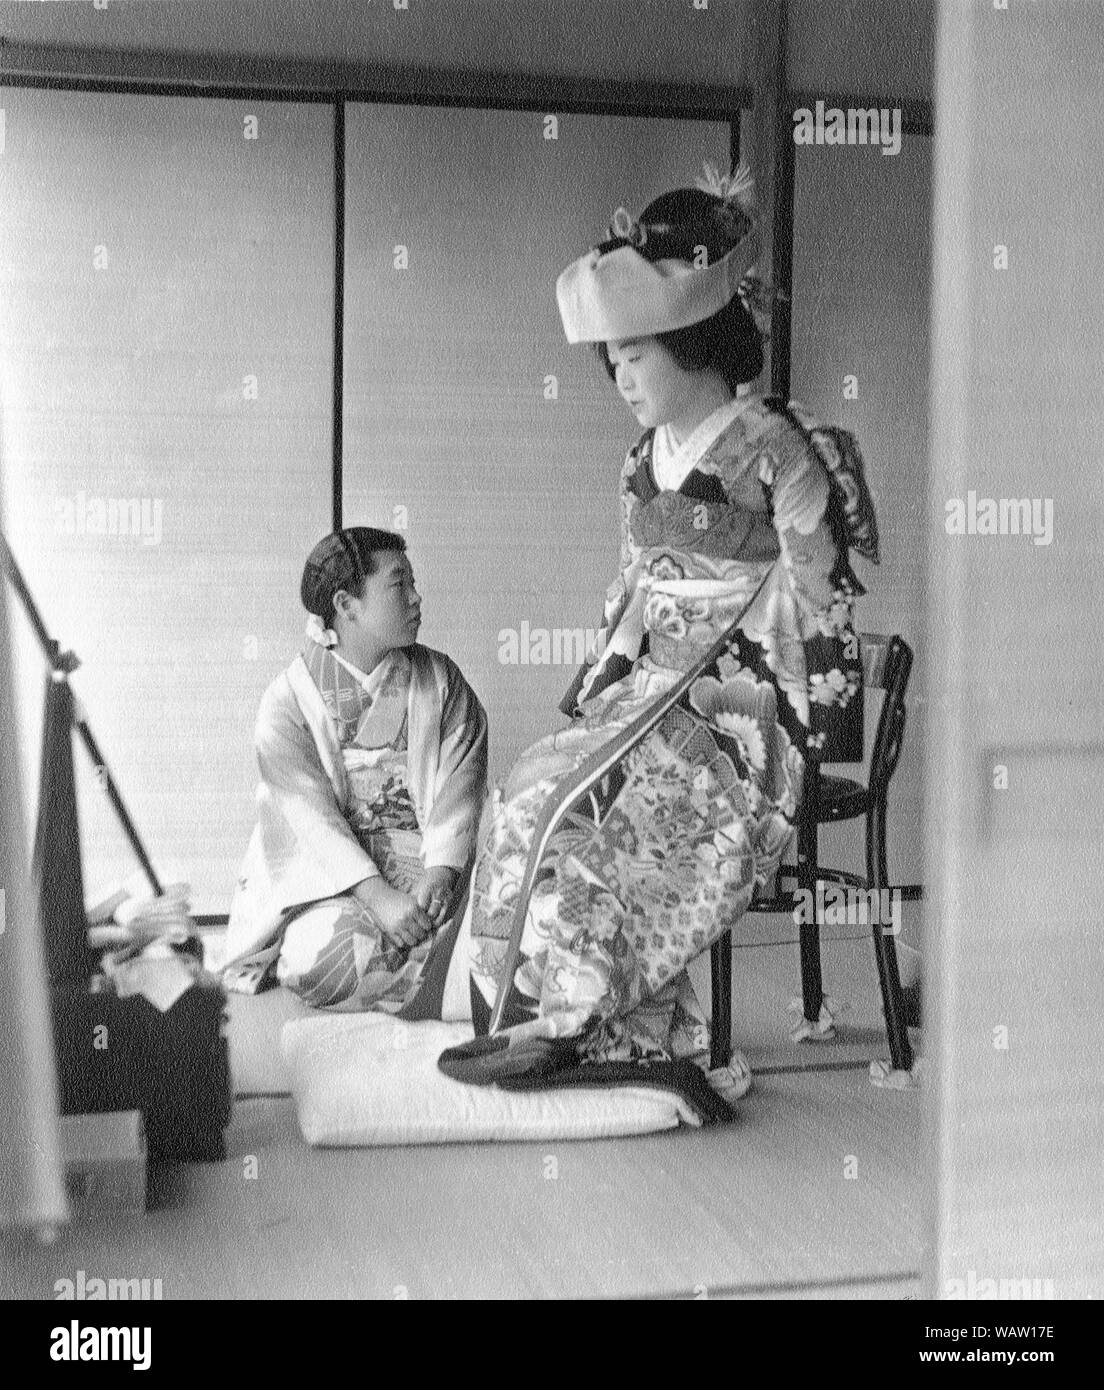 [ 1930s Japan - Japanese Bride in Wedding Kimono ] —   Bride just before the wedding.   A very intimate moment showing the bride wearing a traditional wedding kimono and tsunokakushi, headwear that 'hides' the bride's horns of jealousy, ego and selfishness. Tsunokakushi symbolizes the bride's resolve to become a gentle and obedient wife.   20th century vintage gelatin silver print. Stock Photo